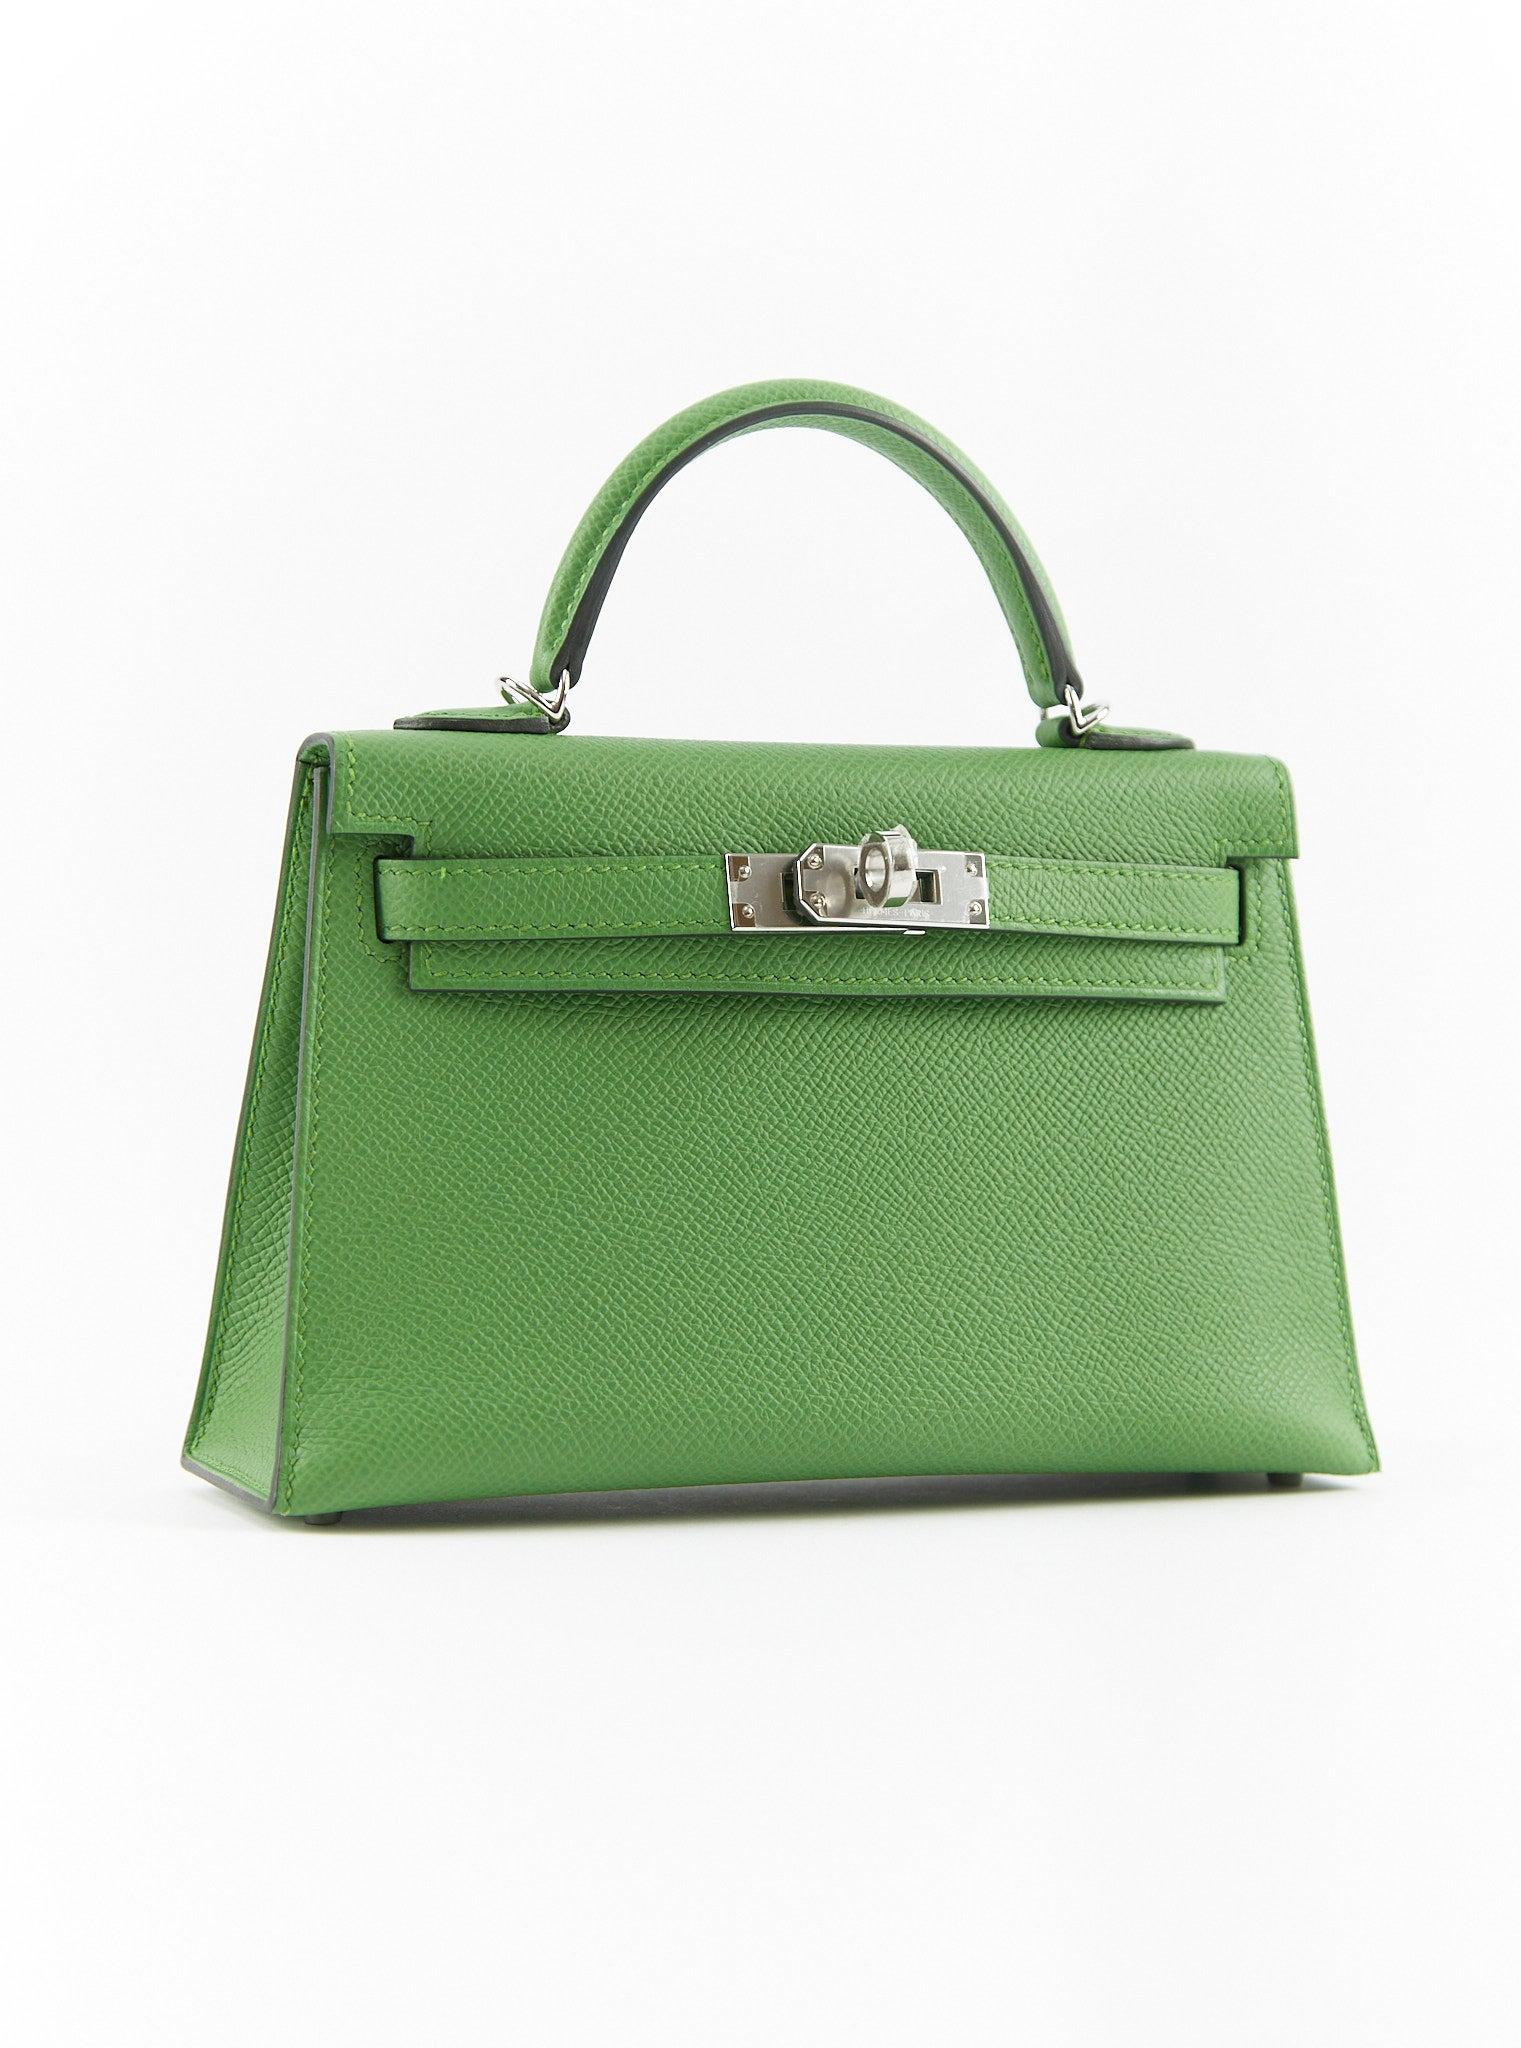 Hermès Mini Kelly II 20cm in Vert Yucca

Sellier

Epsom Leather with Palladium Hardware 

B Stamp /  2024

Accompanied by: Original Receipt, Strap, Hermes box, Hermes dustbag, Strap dustbag, care card, felt and ribbon

Measurements: 7.5